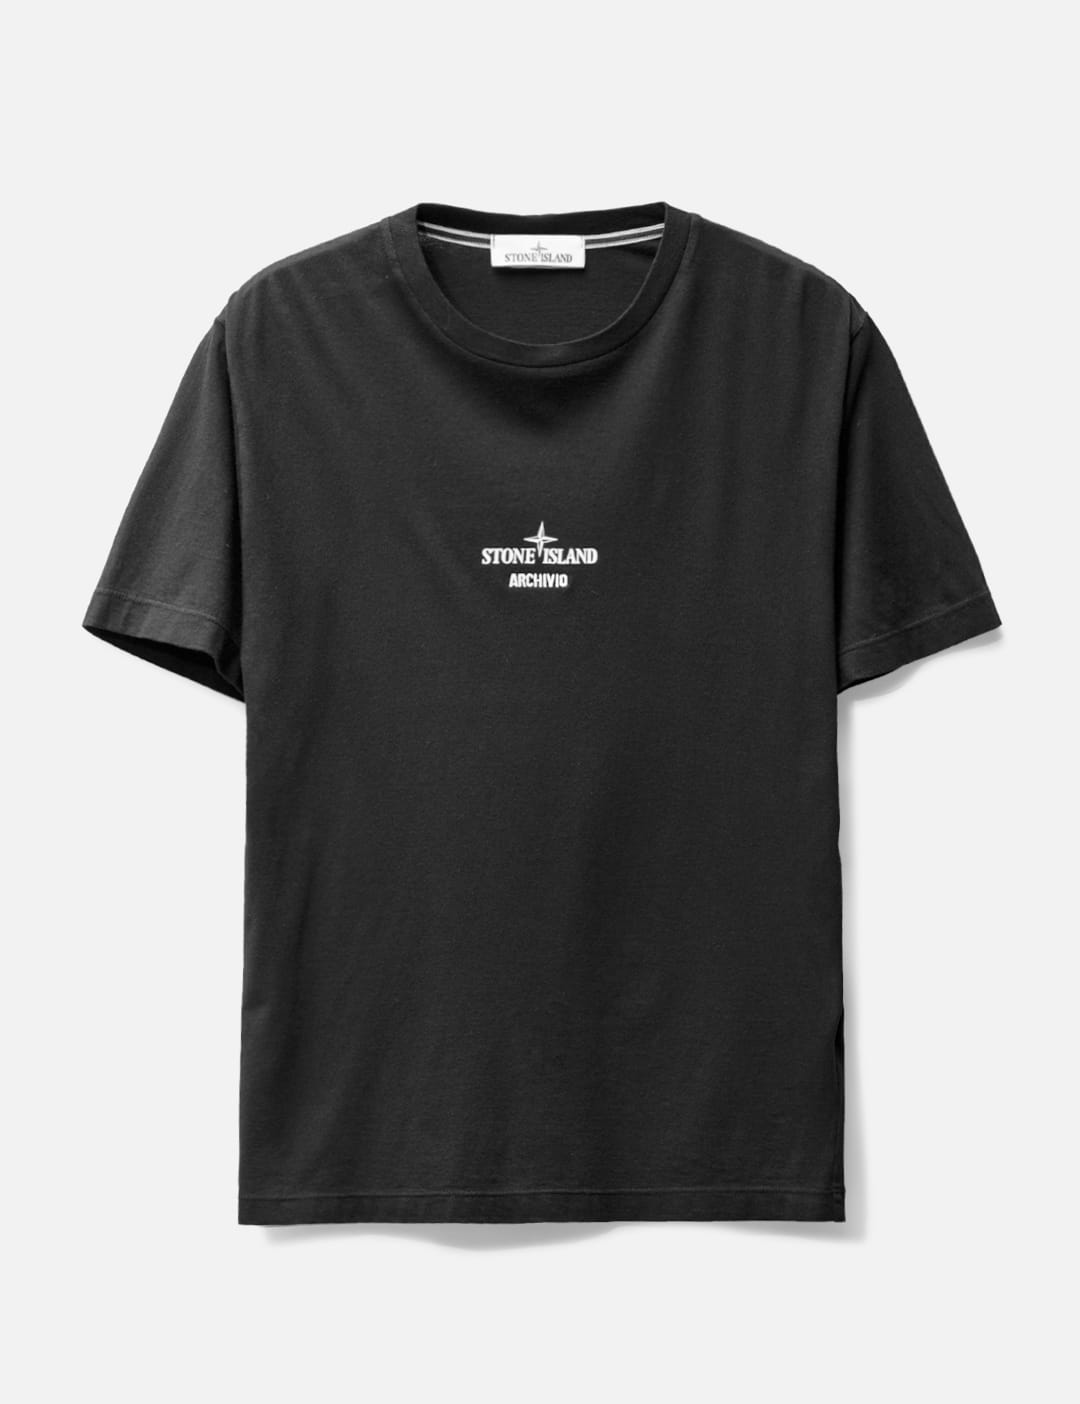 Stone Island - ARCHIVE T-SHIRT | HBX - Globally Curated Fashion